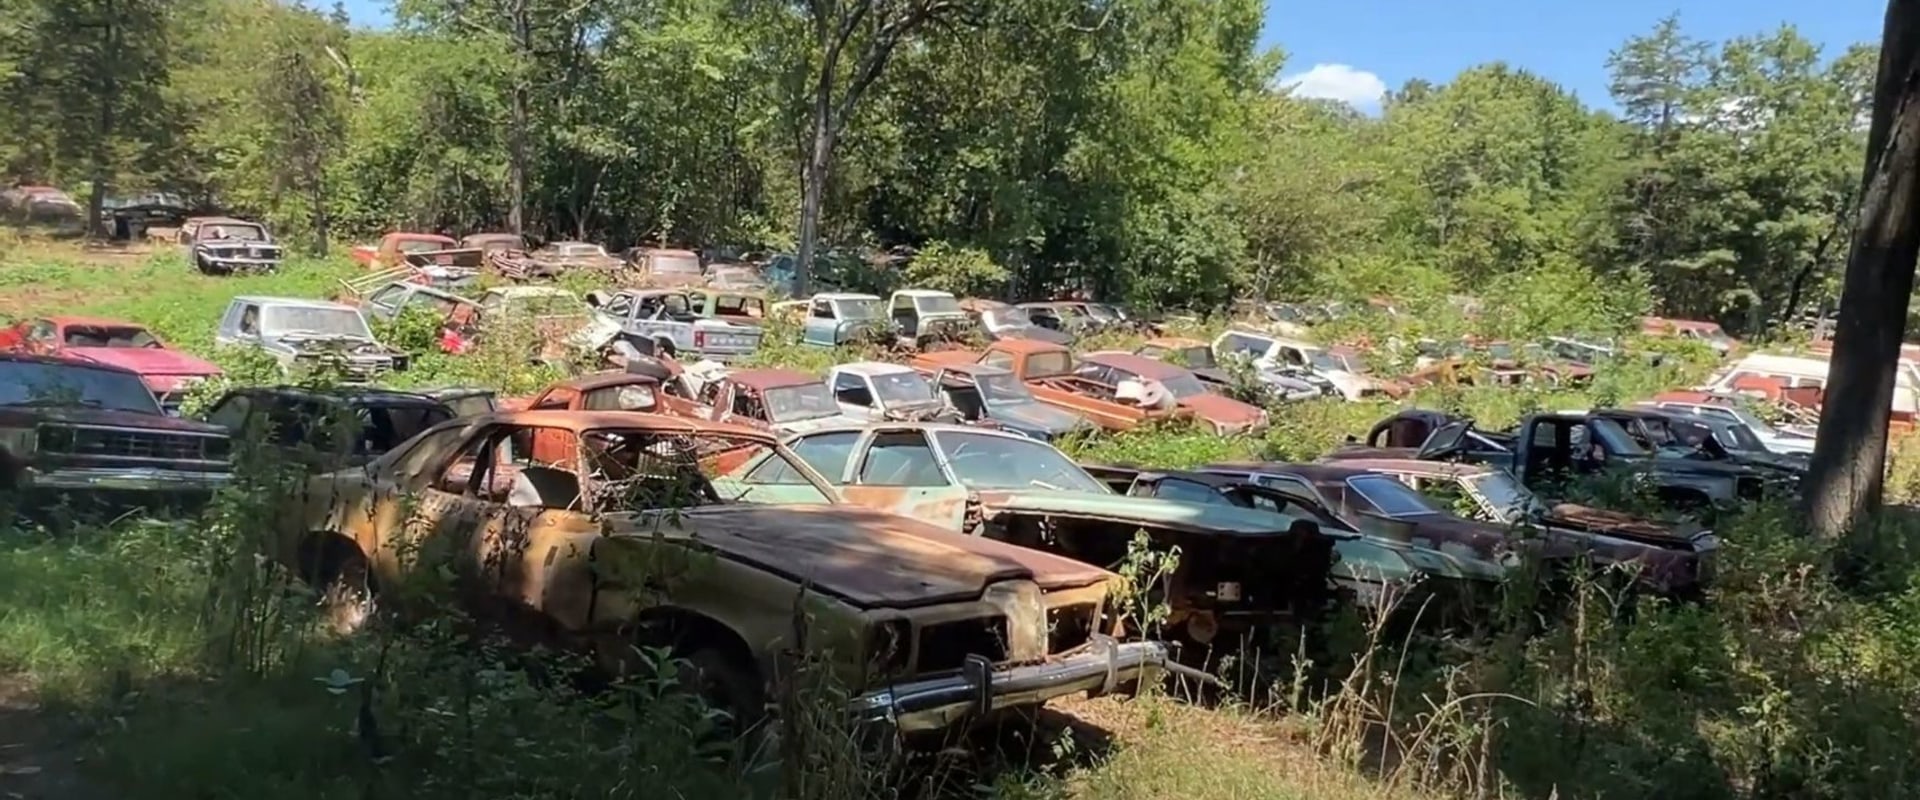 Exploring the Fascinating Vintage Cars of Central Texas